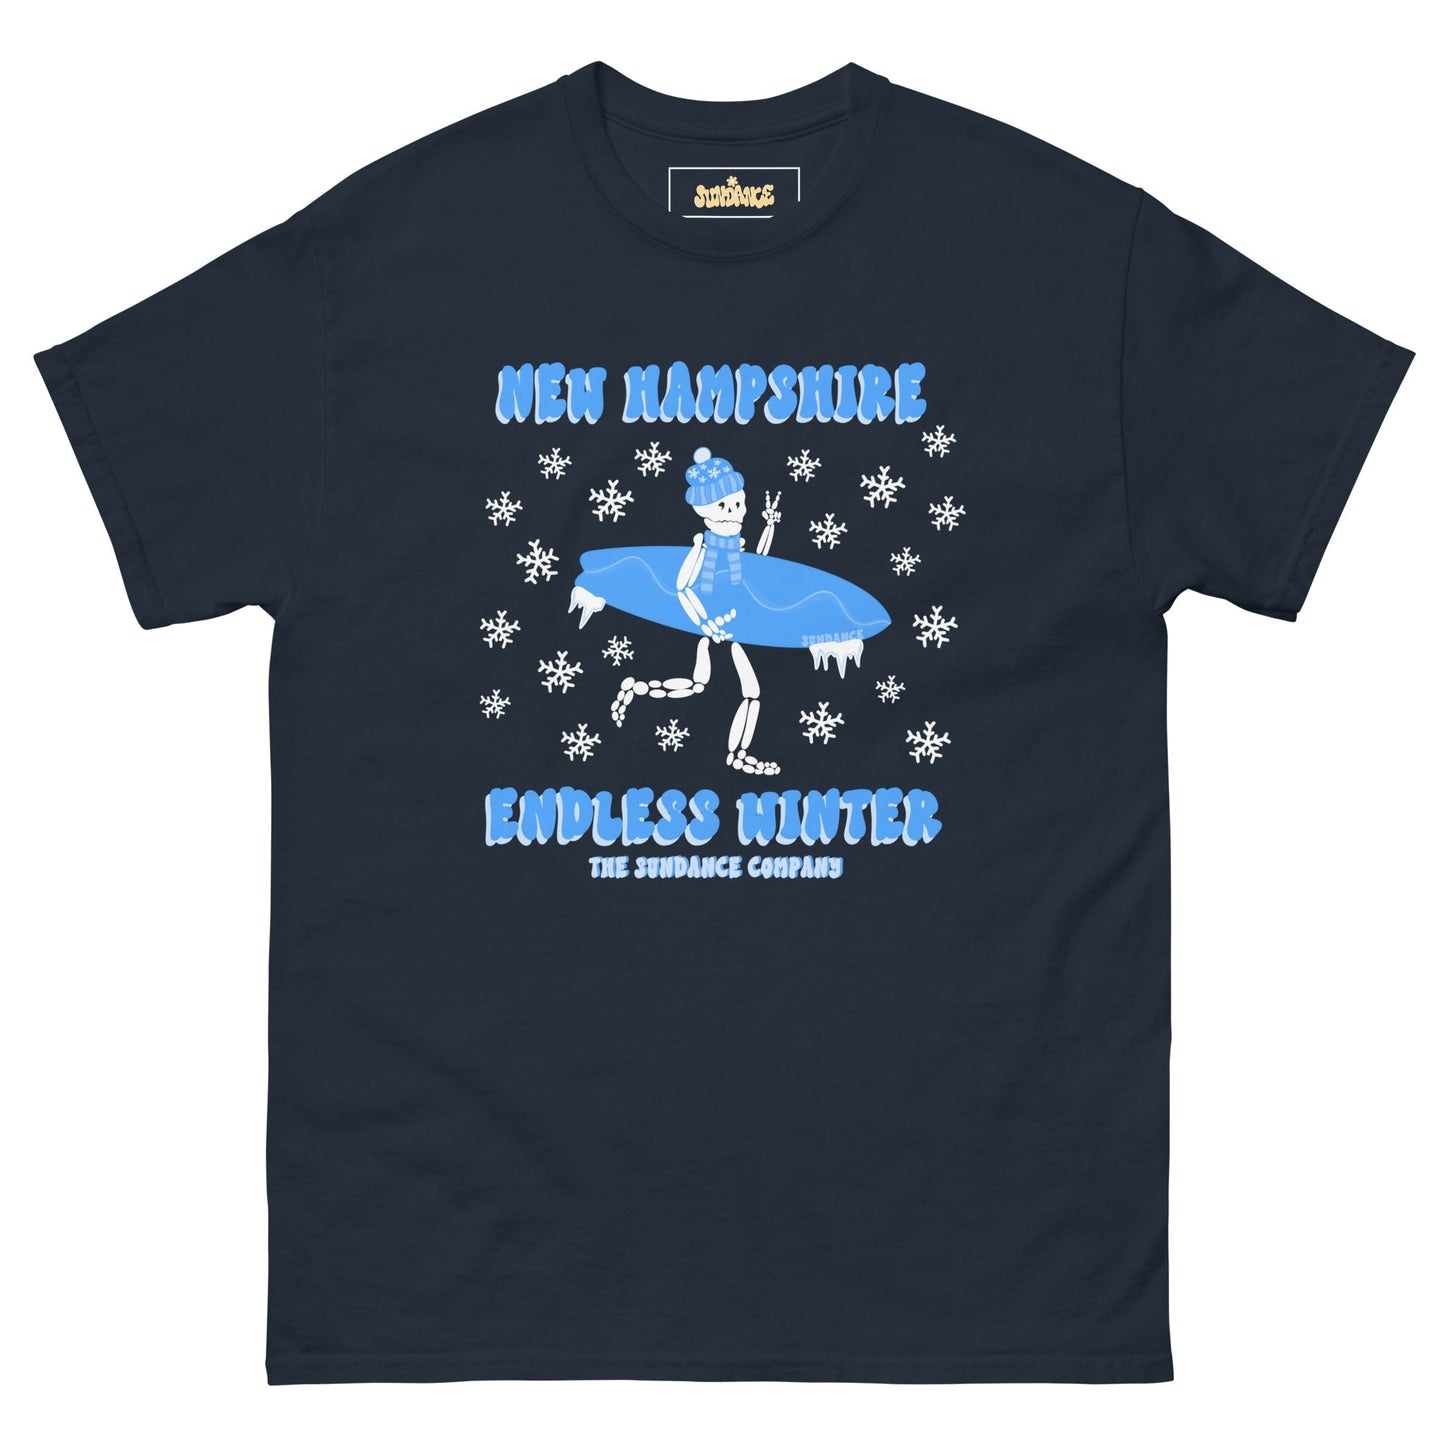 New Hampshire Endless Winter Tee